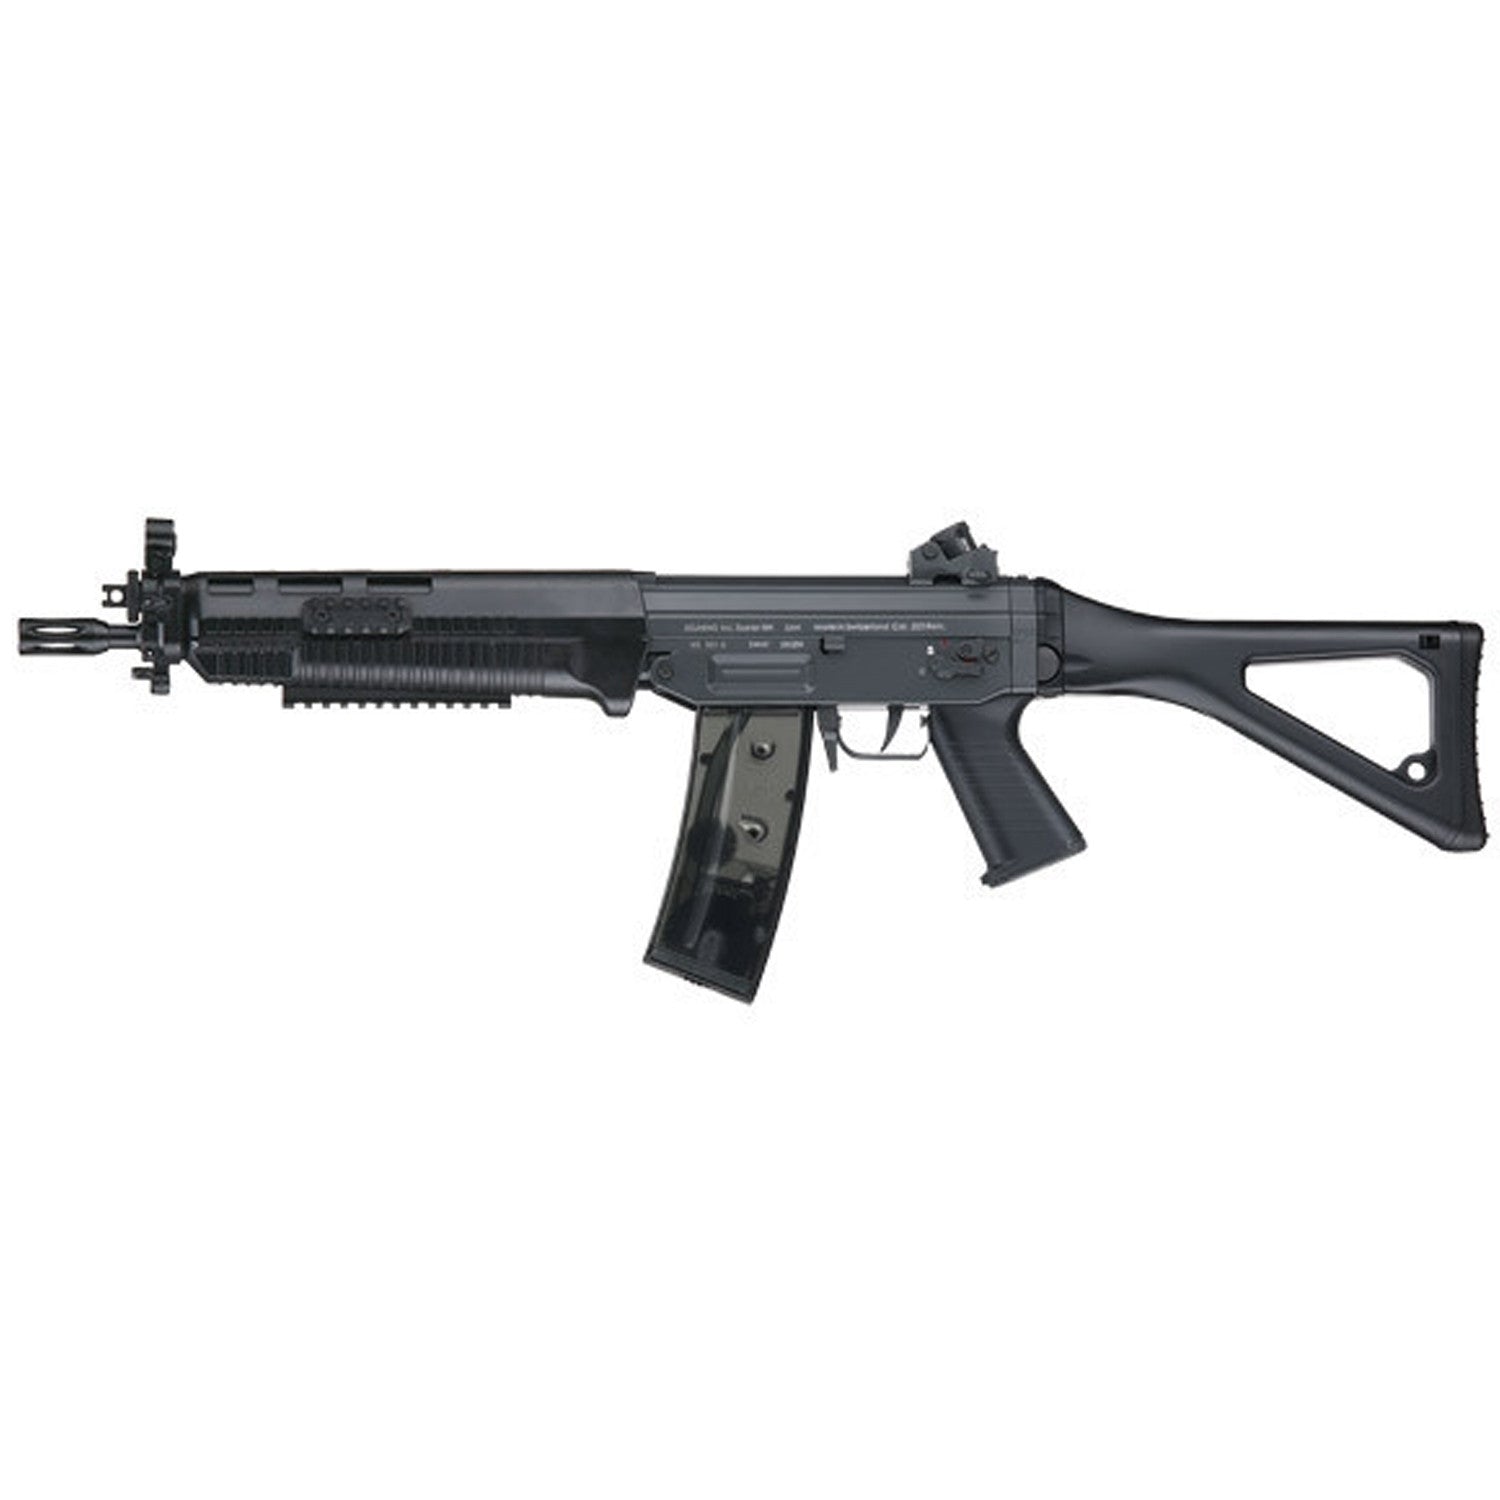 ICS SIG 551 - •Motor: ICS Turbo 3000 Medium Type •Body: Steel / Aluminum •Rate of Fire: Depends on battery & spring installed •Muzzle Velocity: 395 FPS, 120 m/s •Dimension: 835mm x 578mm •Inner Barrel Length: 370mm •Weight: 2800g (Without Battery) •Inner Barrel Diameter: 6.08mm •Magazine Weight: 200g •Magazine Capacity: 470 rounds, comes with one mag •Gearbox: M120 •Gears: ICS Steel Gear Set •Bushing: ICS Steel Bushing